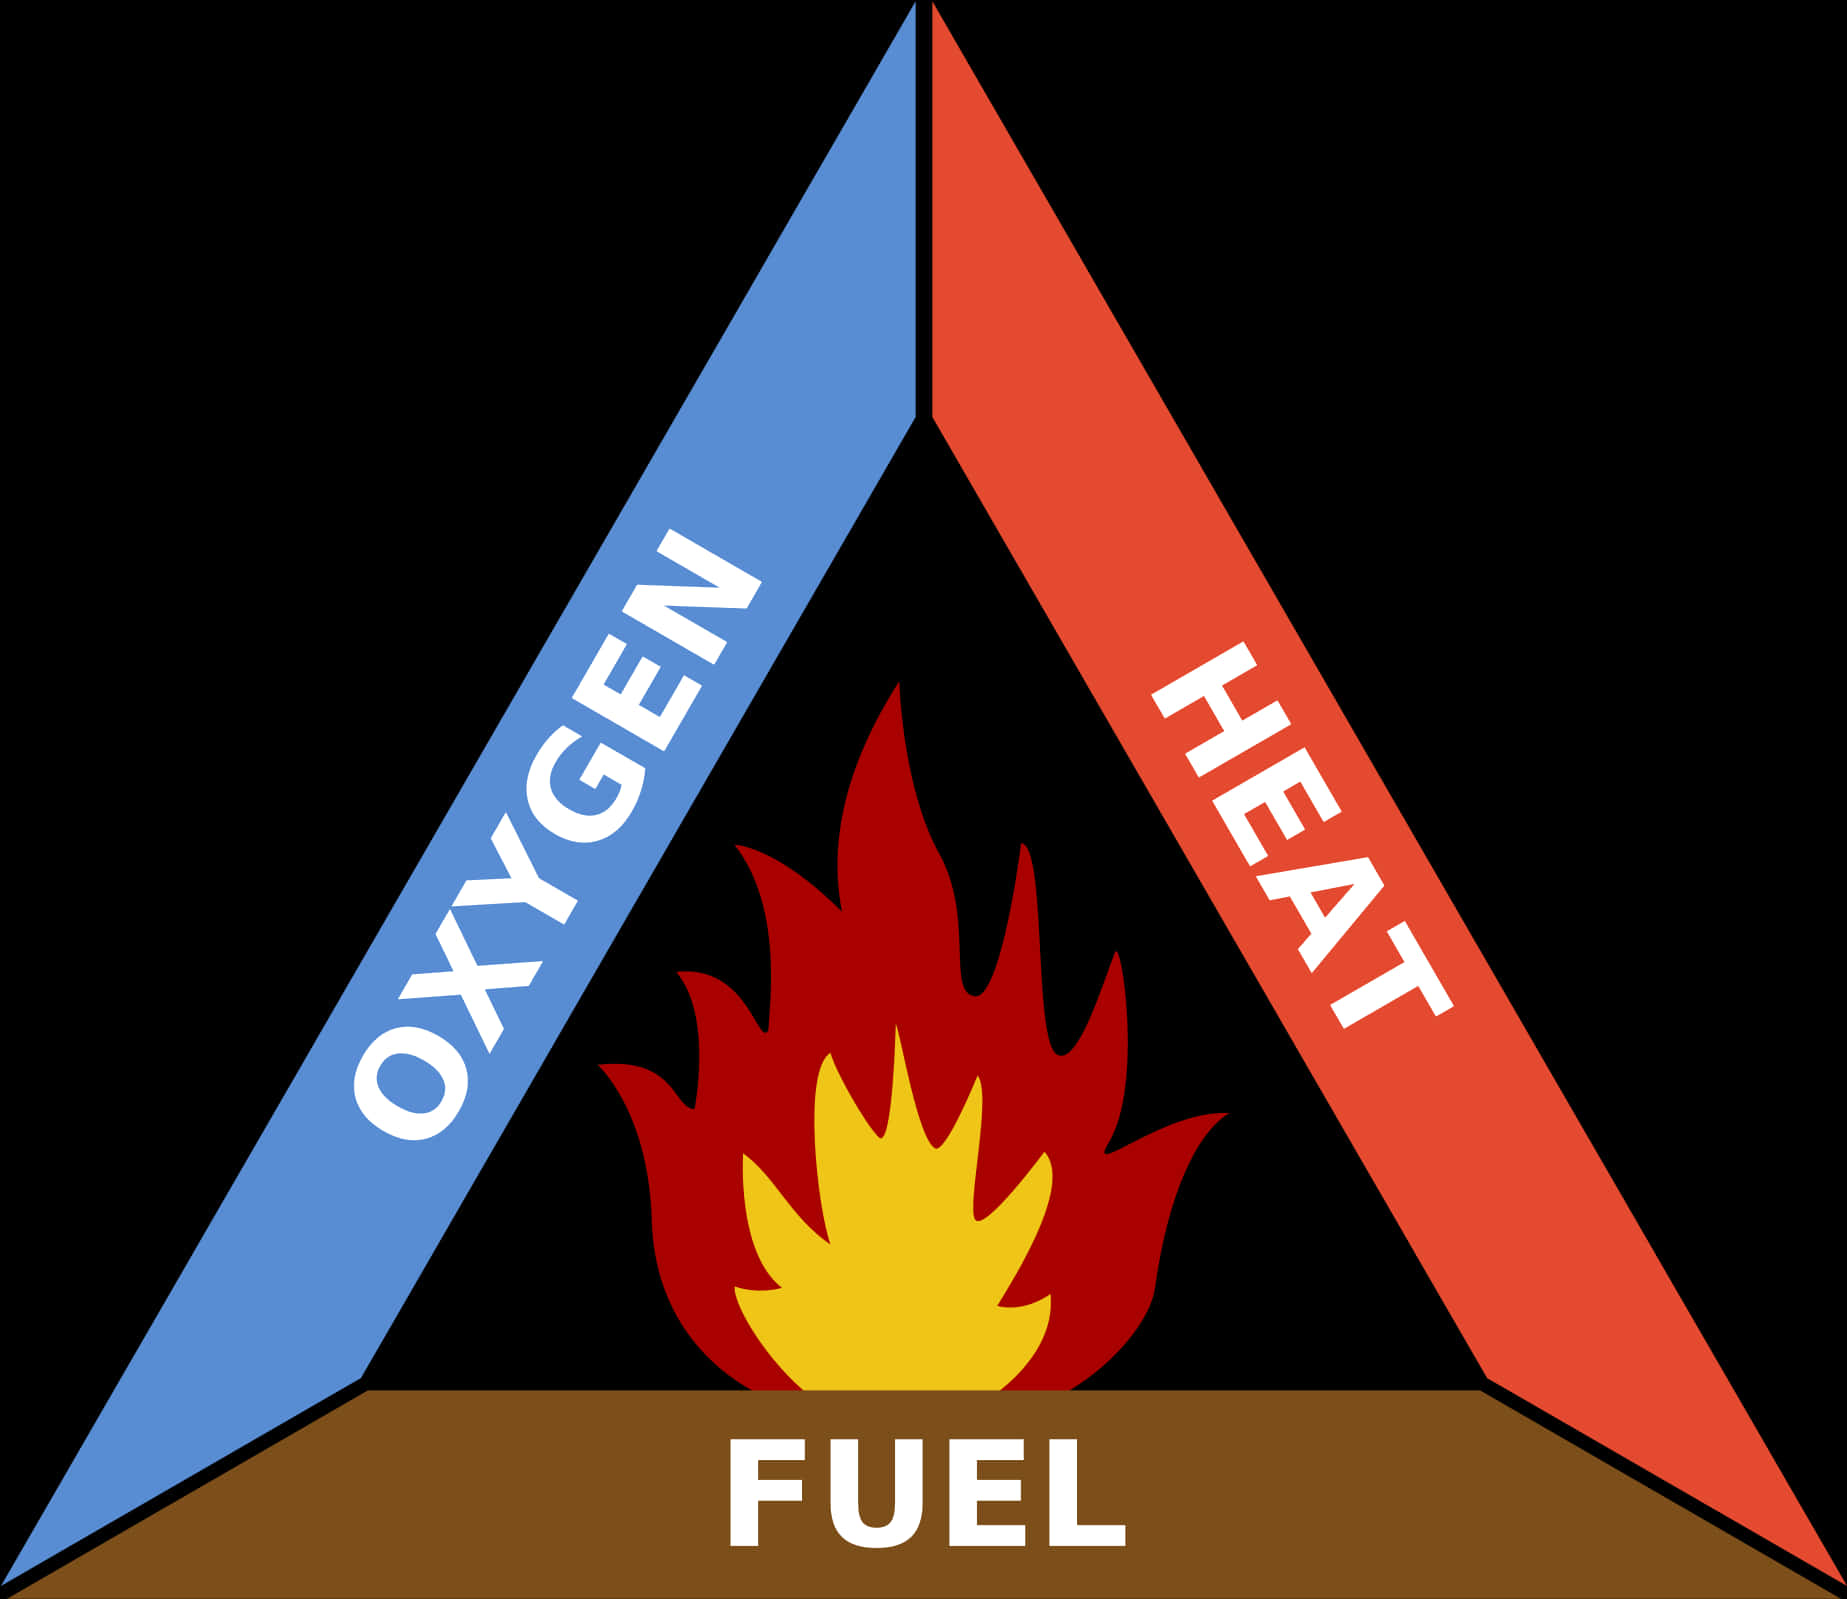 Fire Triangle Elements Illustration PNG image